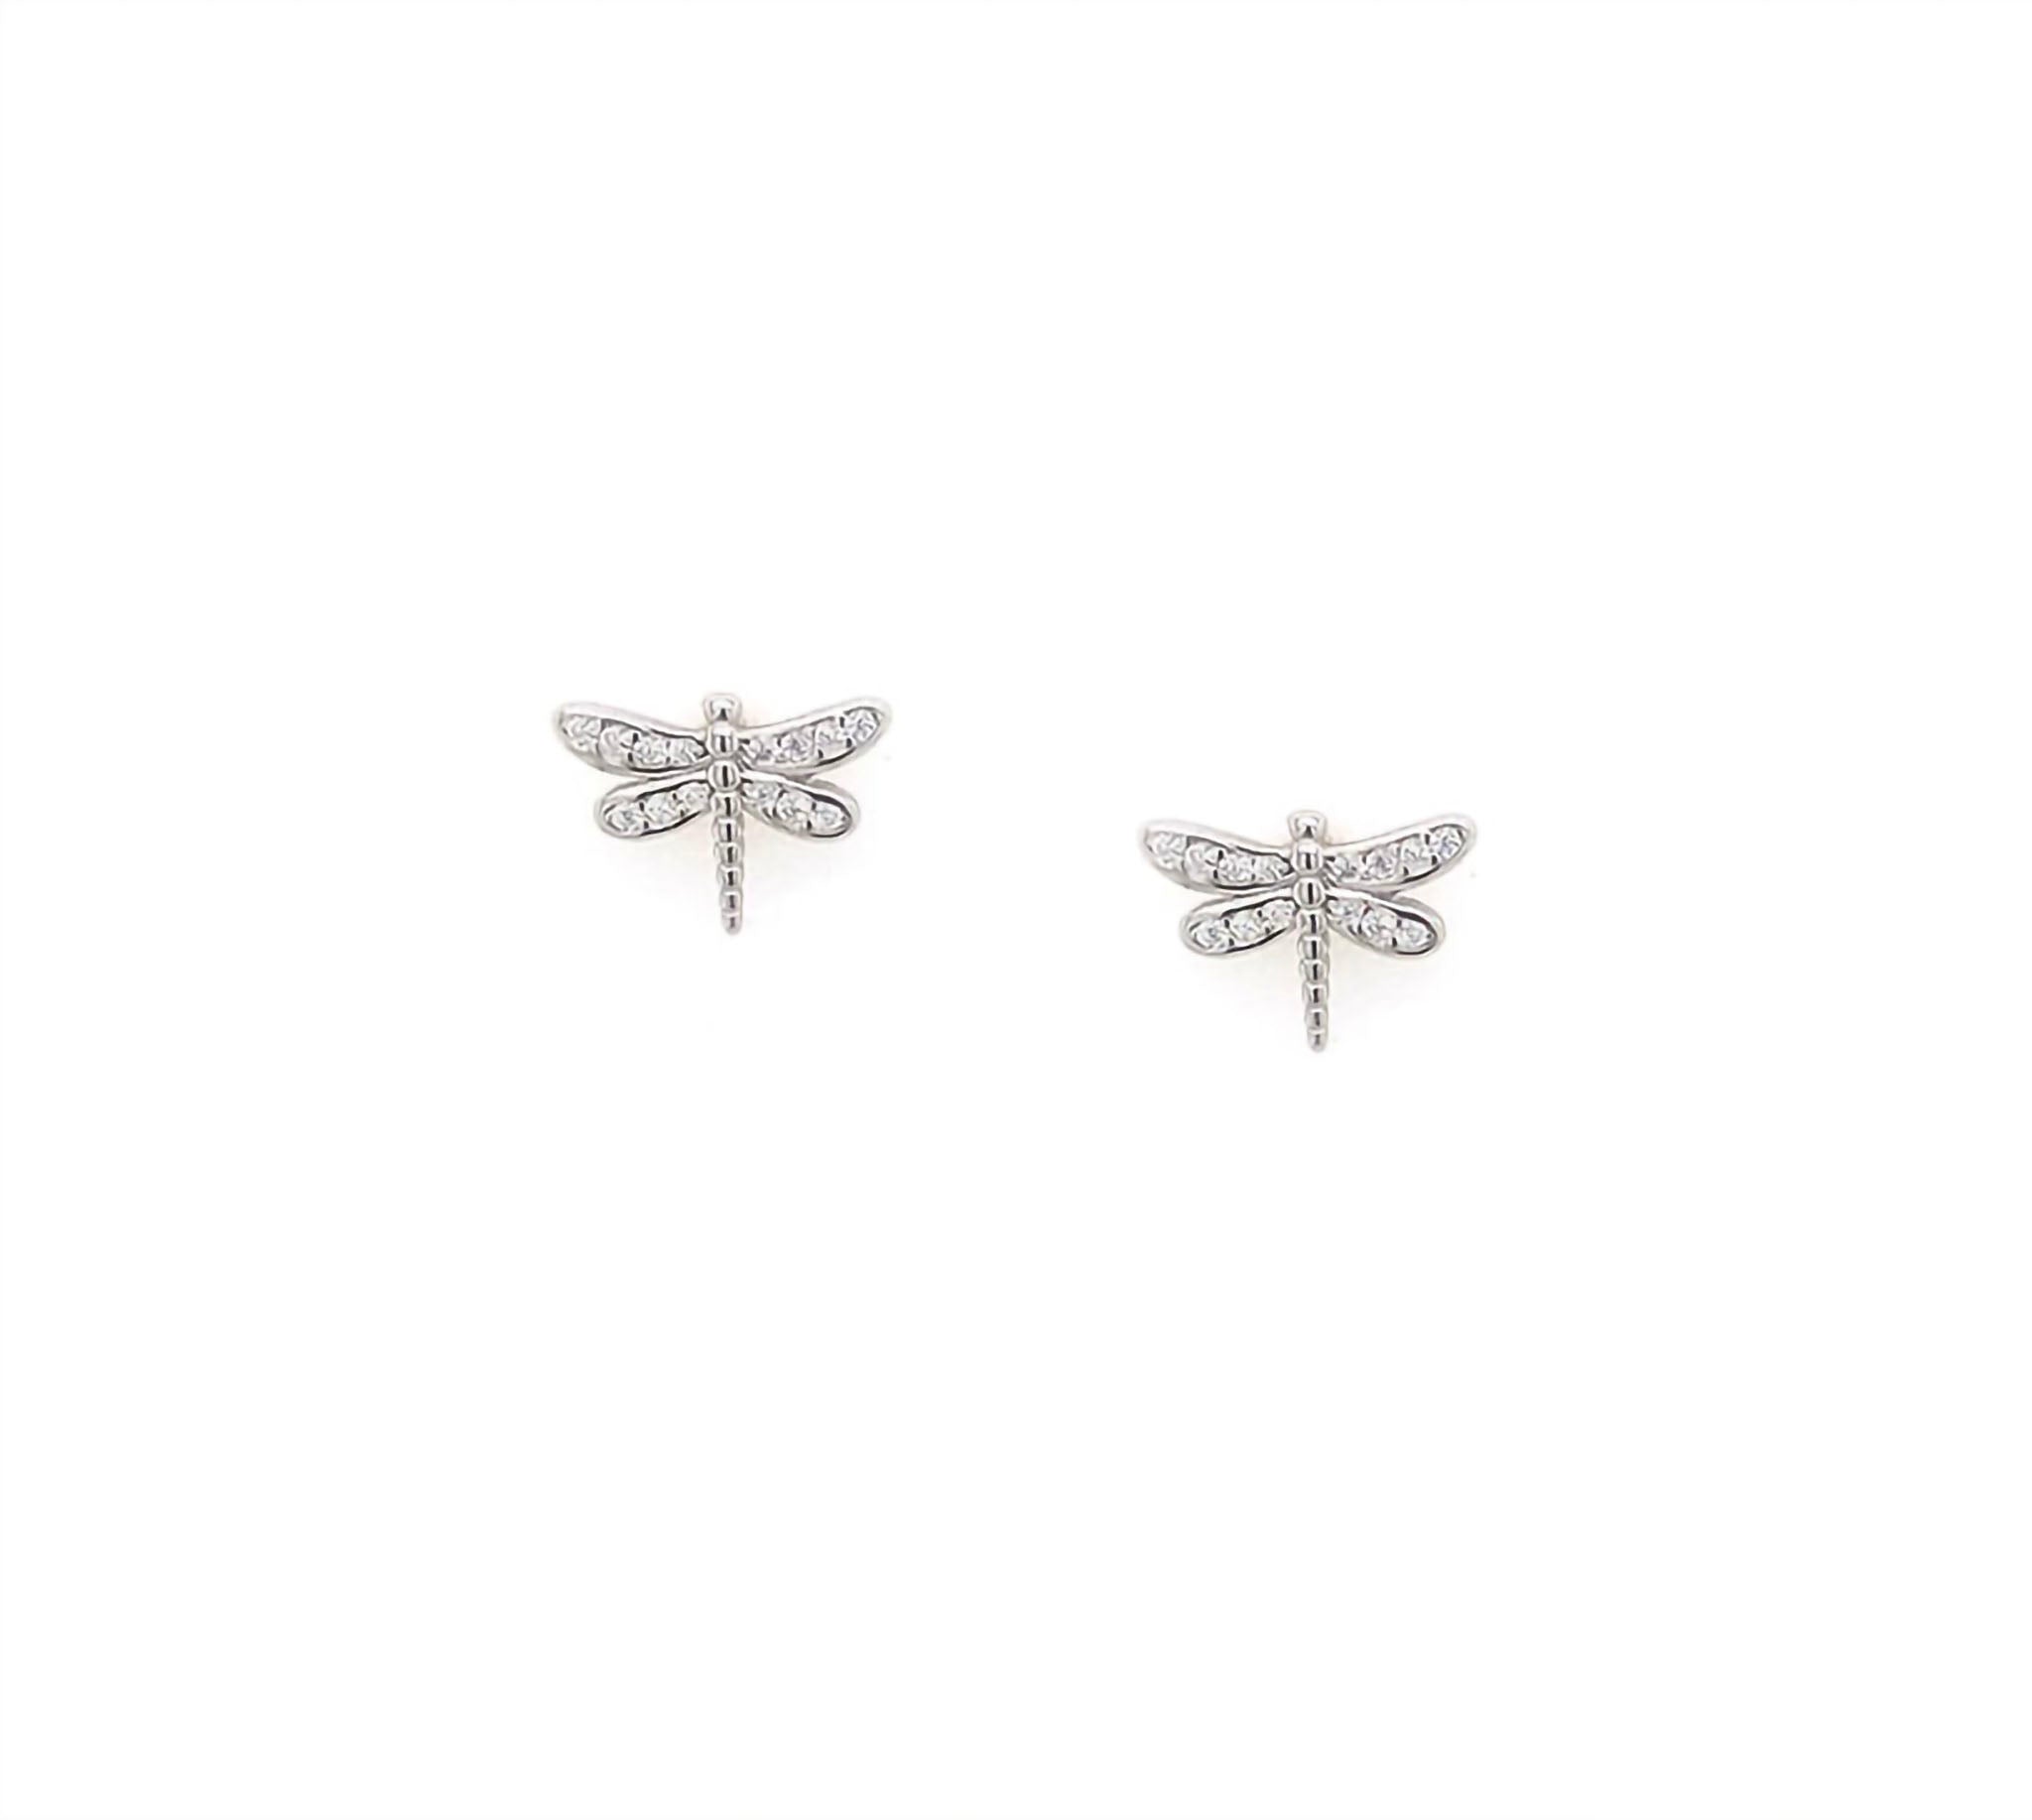 An dainty pair of pavé Dragonfly stud earrings. Made with nature lovers in mind, this pair of studs are perfect for everyday wear. This pair of earrings have gemstone filled wings with a detailed solid silver body. 